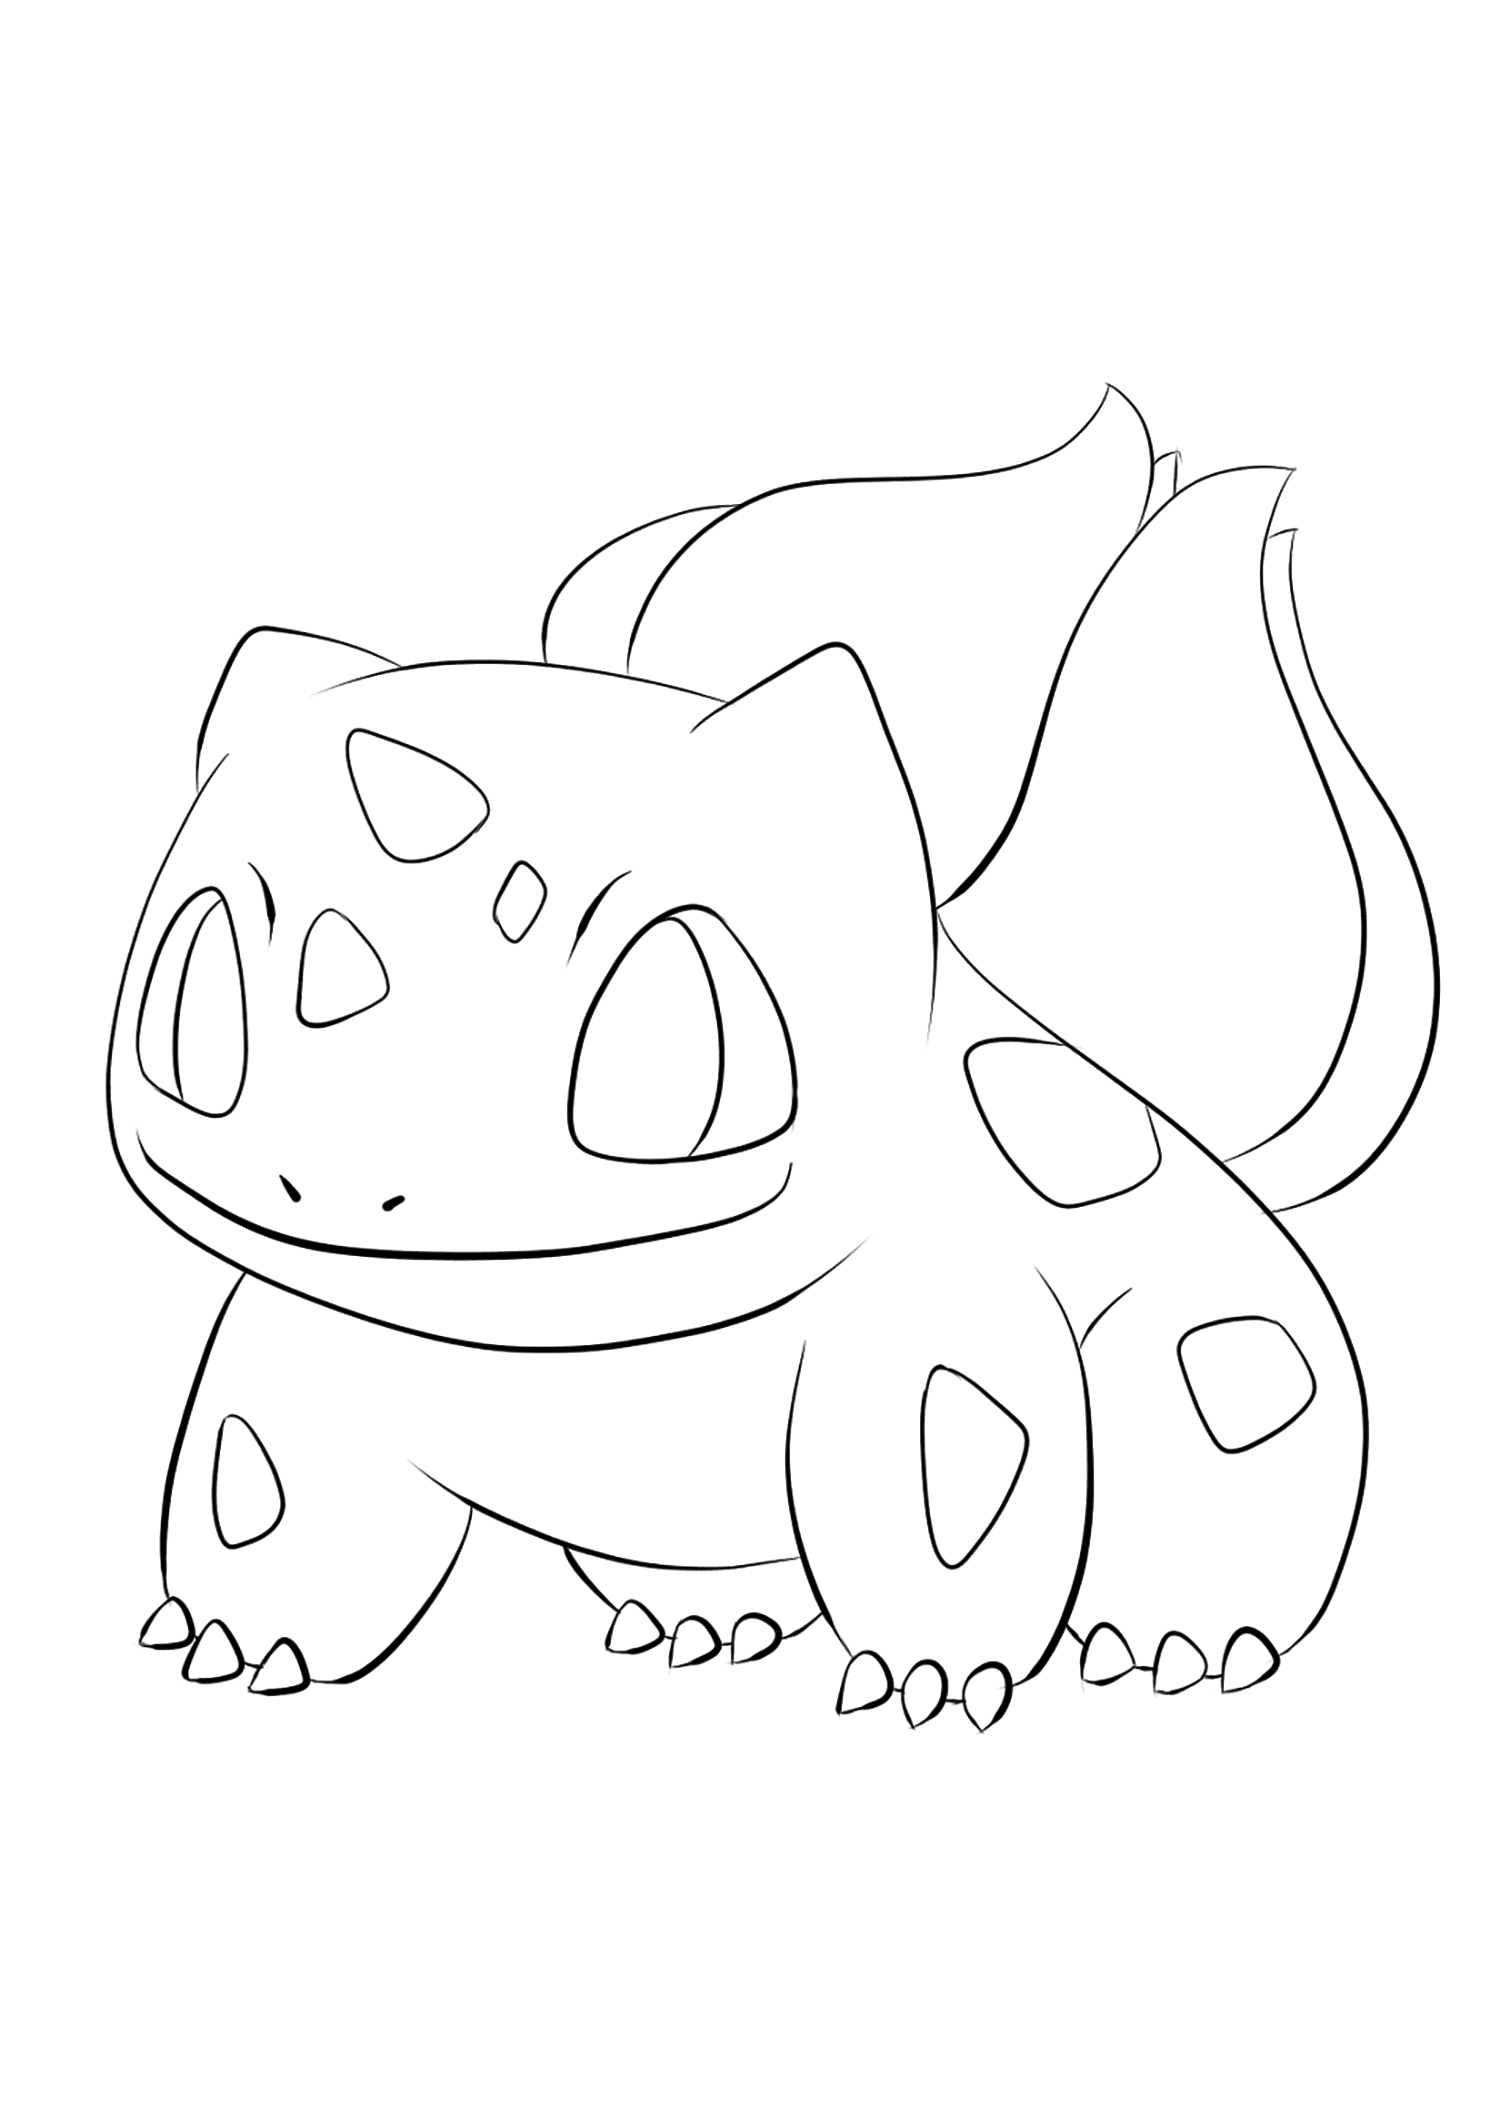 Bulbasaur (No.01). Bulbasaur Coloring page, Generation I Pokemon of type Grass and PoisonOriginal image credit: Pokemon linearts by Lilly Gerbil'font-size:smaller;color:gray'>Permission: All rights reserved © Pokemon company and Ken Sugimori.